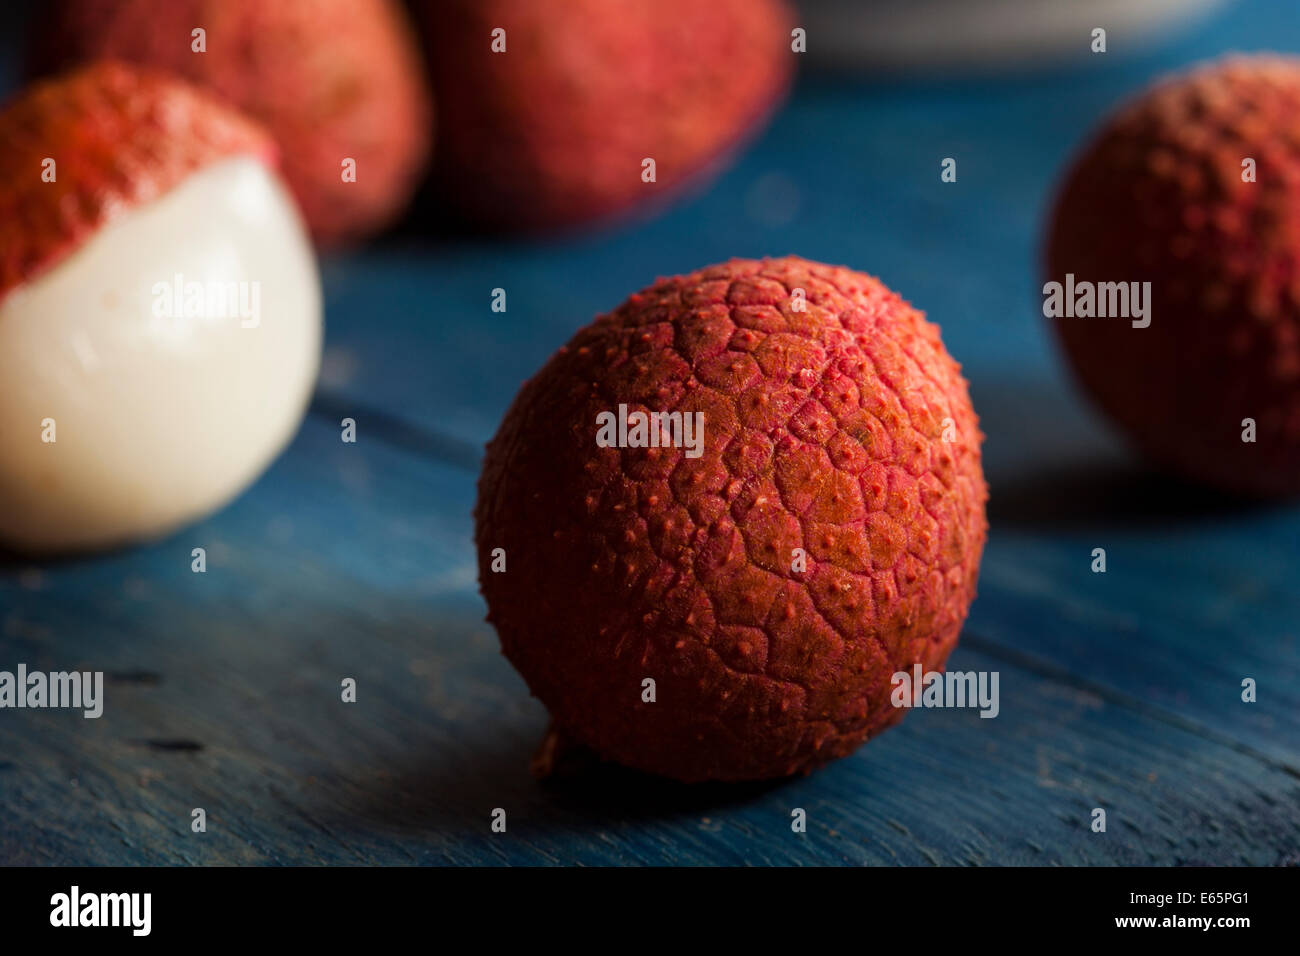 Healthy Organic Red Lychee on a Background Stock Photo